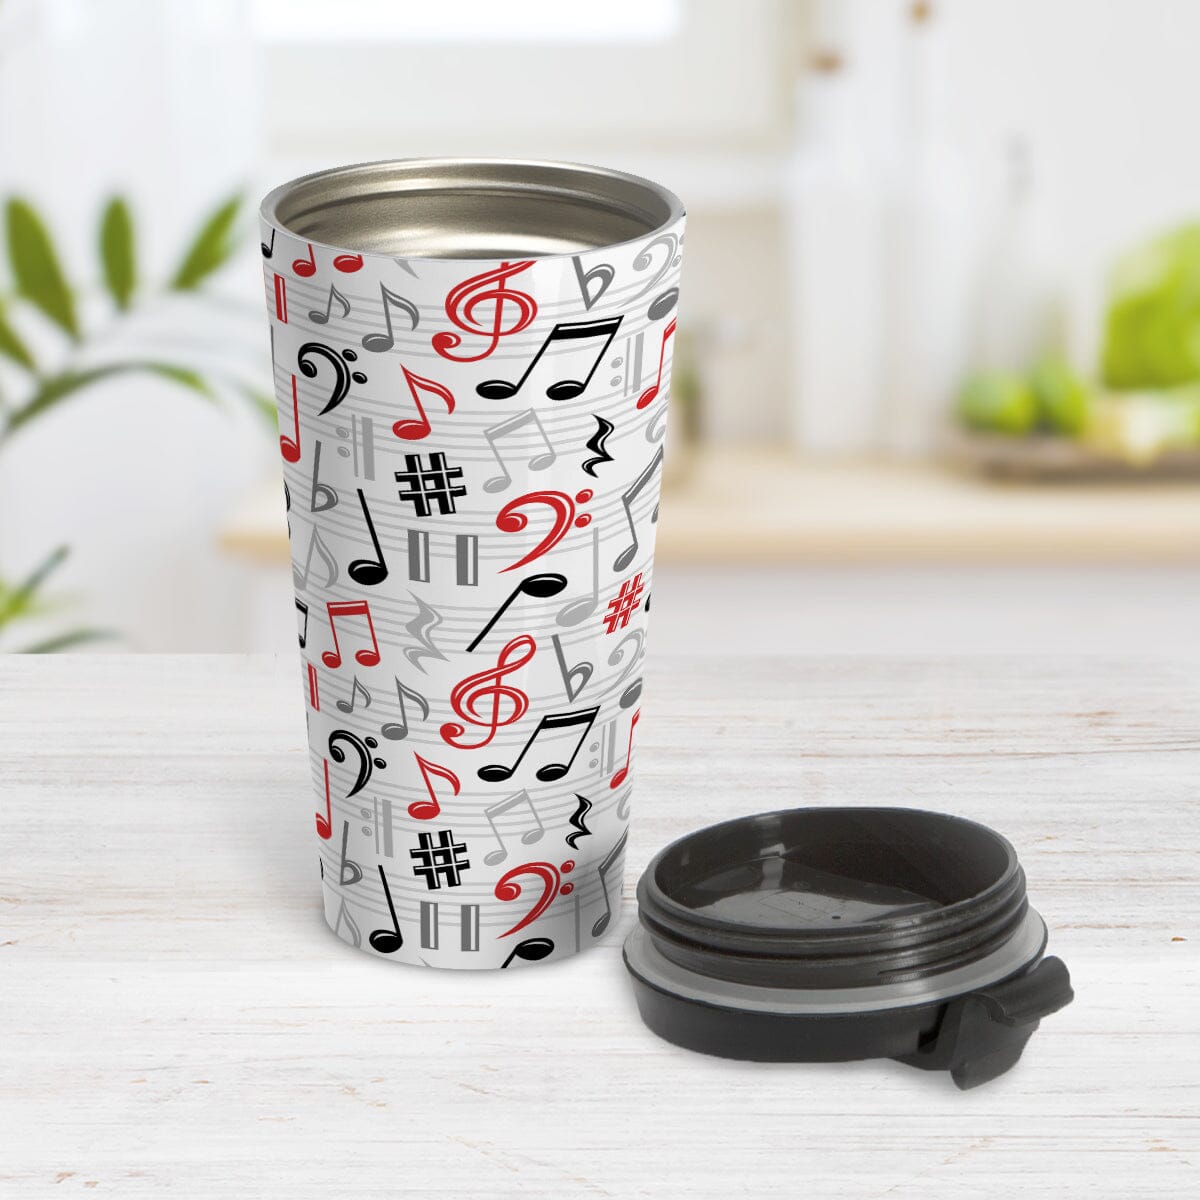 Red Music Notes Pattern Travel Mug (15oz) at Amy's Coffee Mugs. A stainless steel travel mug designed with music notes and symbols in red, black, and gray in a pattern that wraps around the travel mug. Photo shows the travel mug open with the lid laying on the tabletop beside it. 